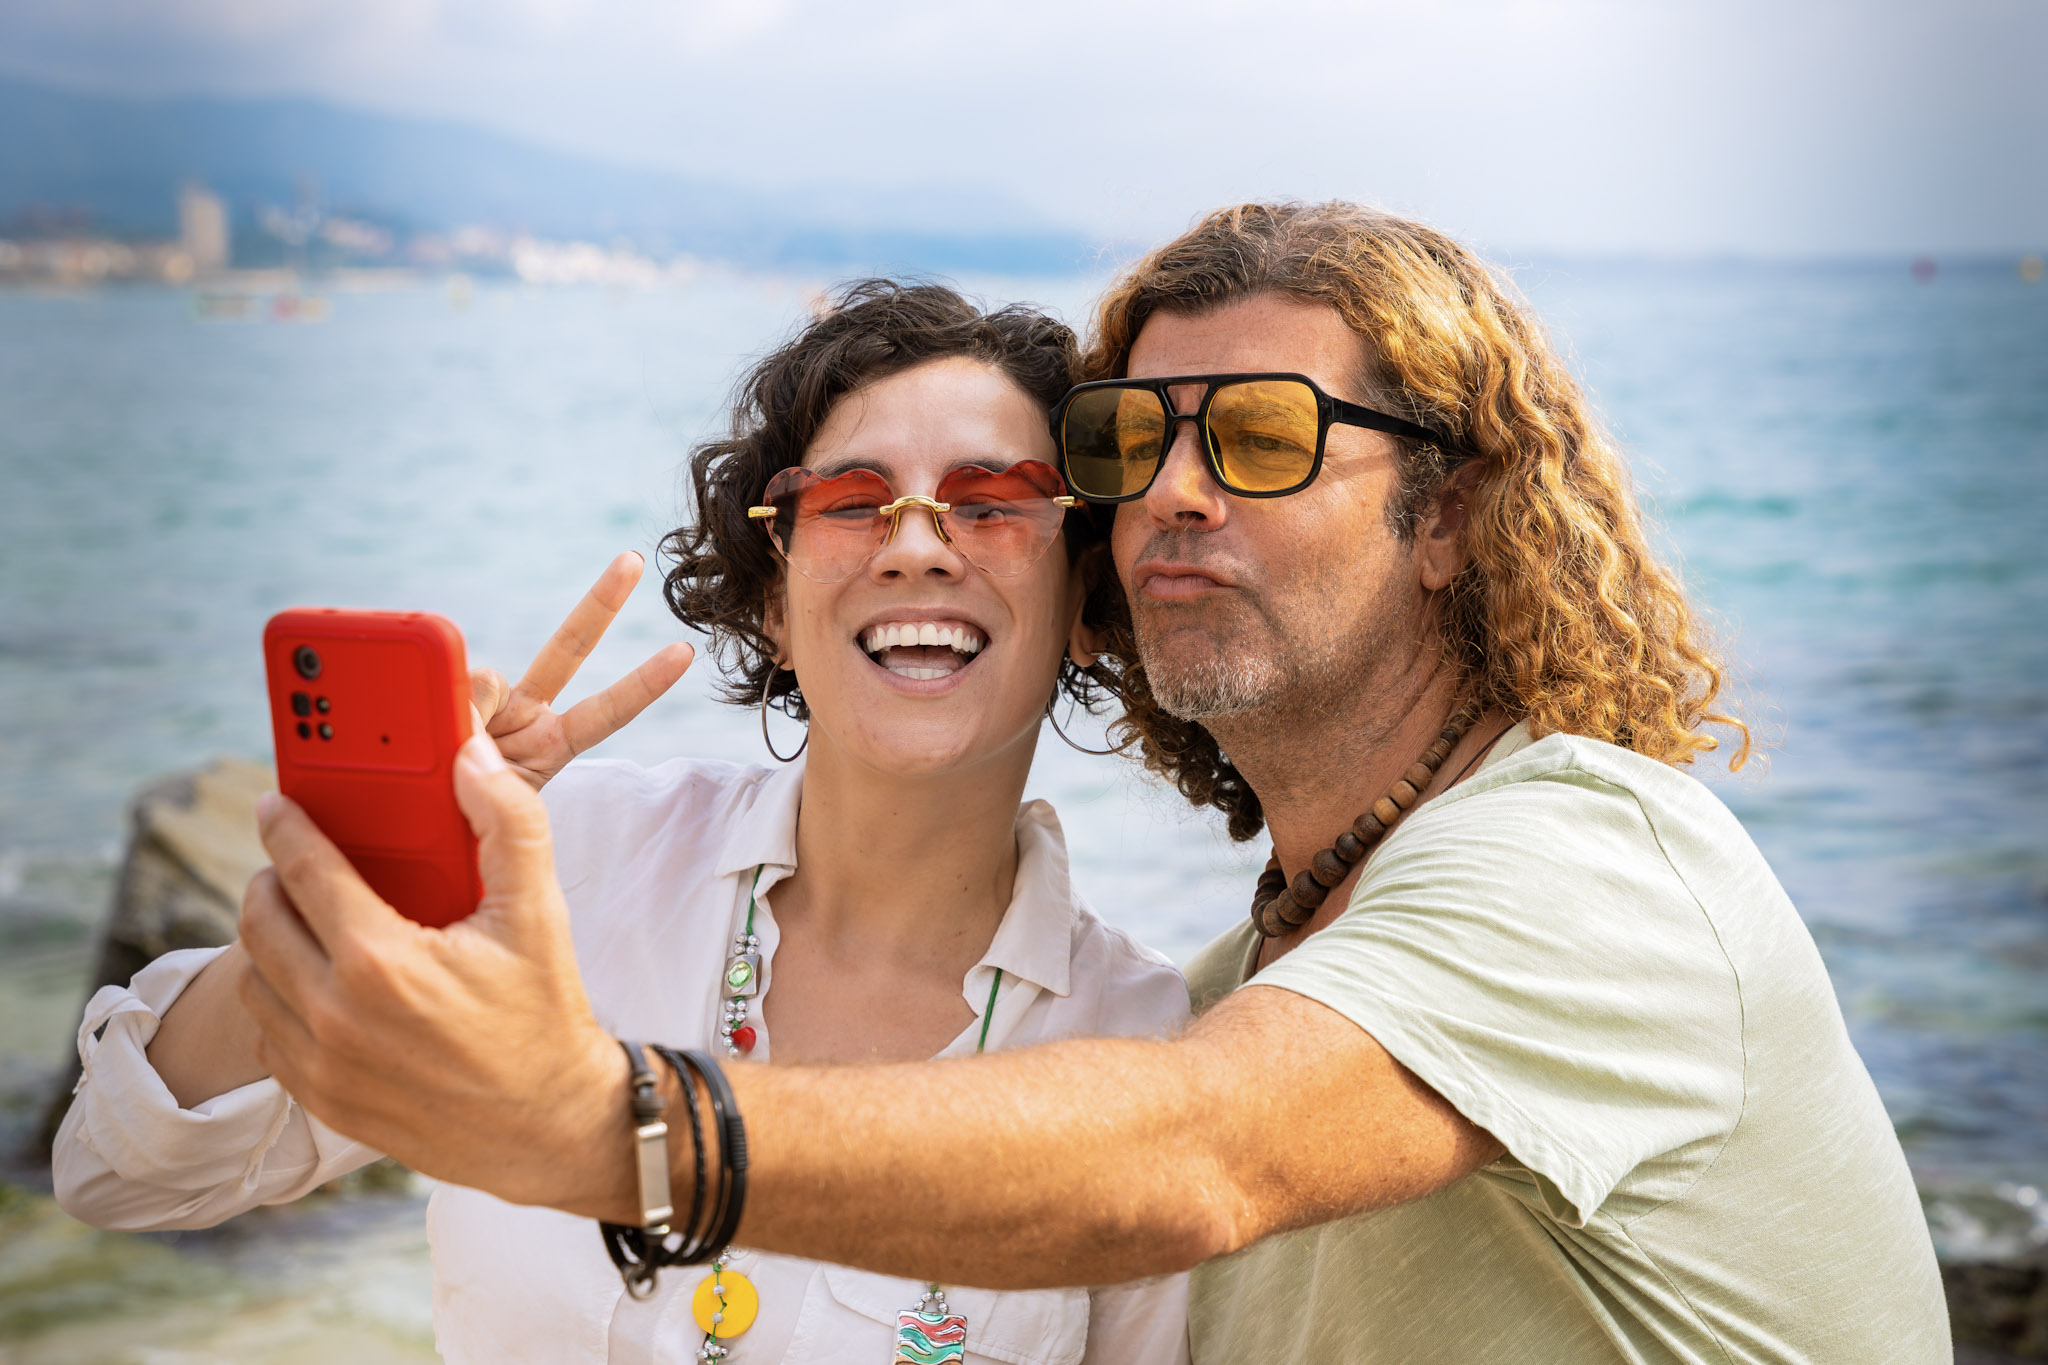 stock image of a woman and man, both wearing sunglasses, taking a selfie using a smartphone while posing by the waterside